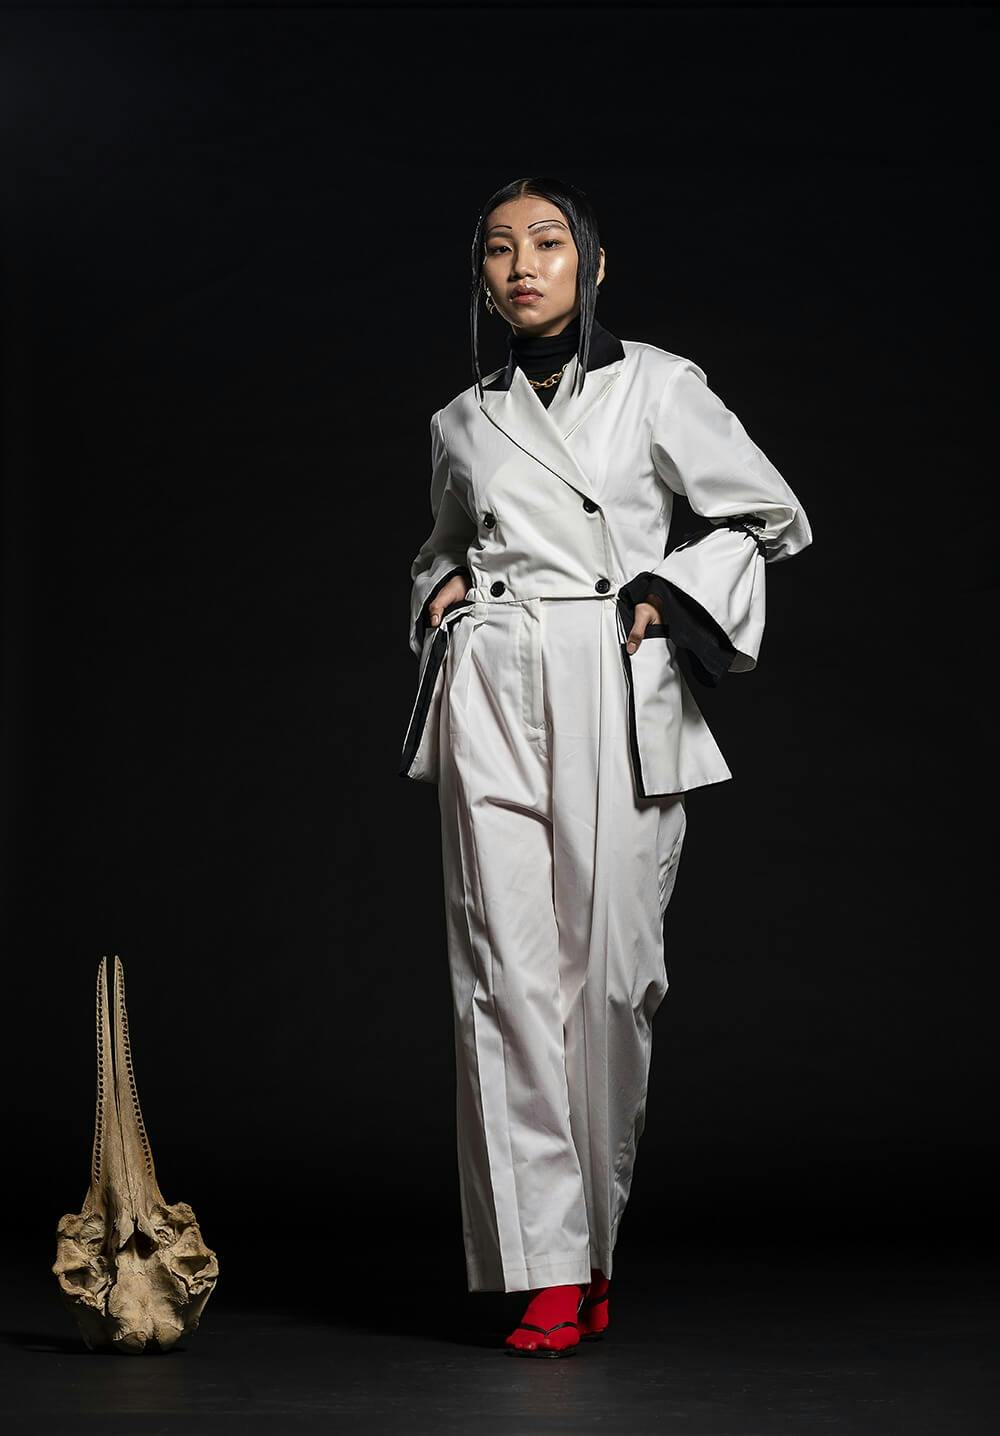 Black & White Tie to Fit Jumpsuit, a product by Corpora Studio